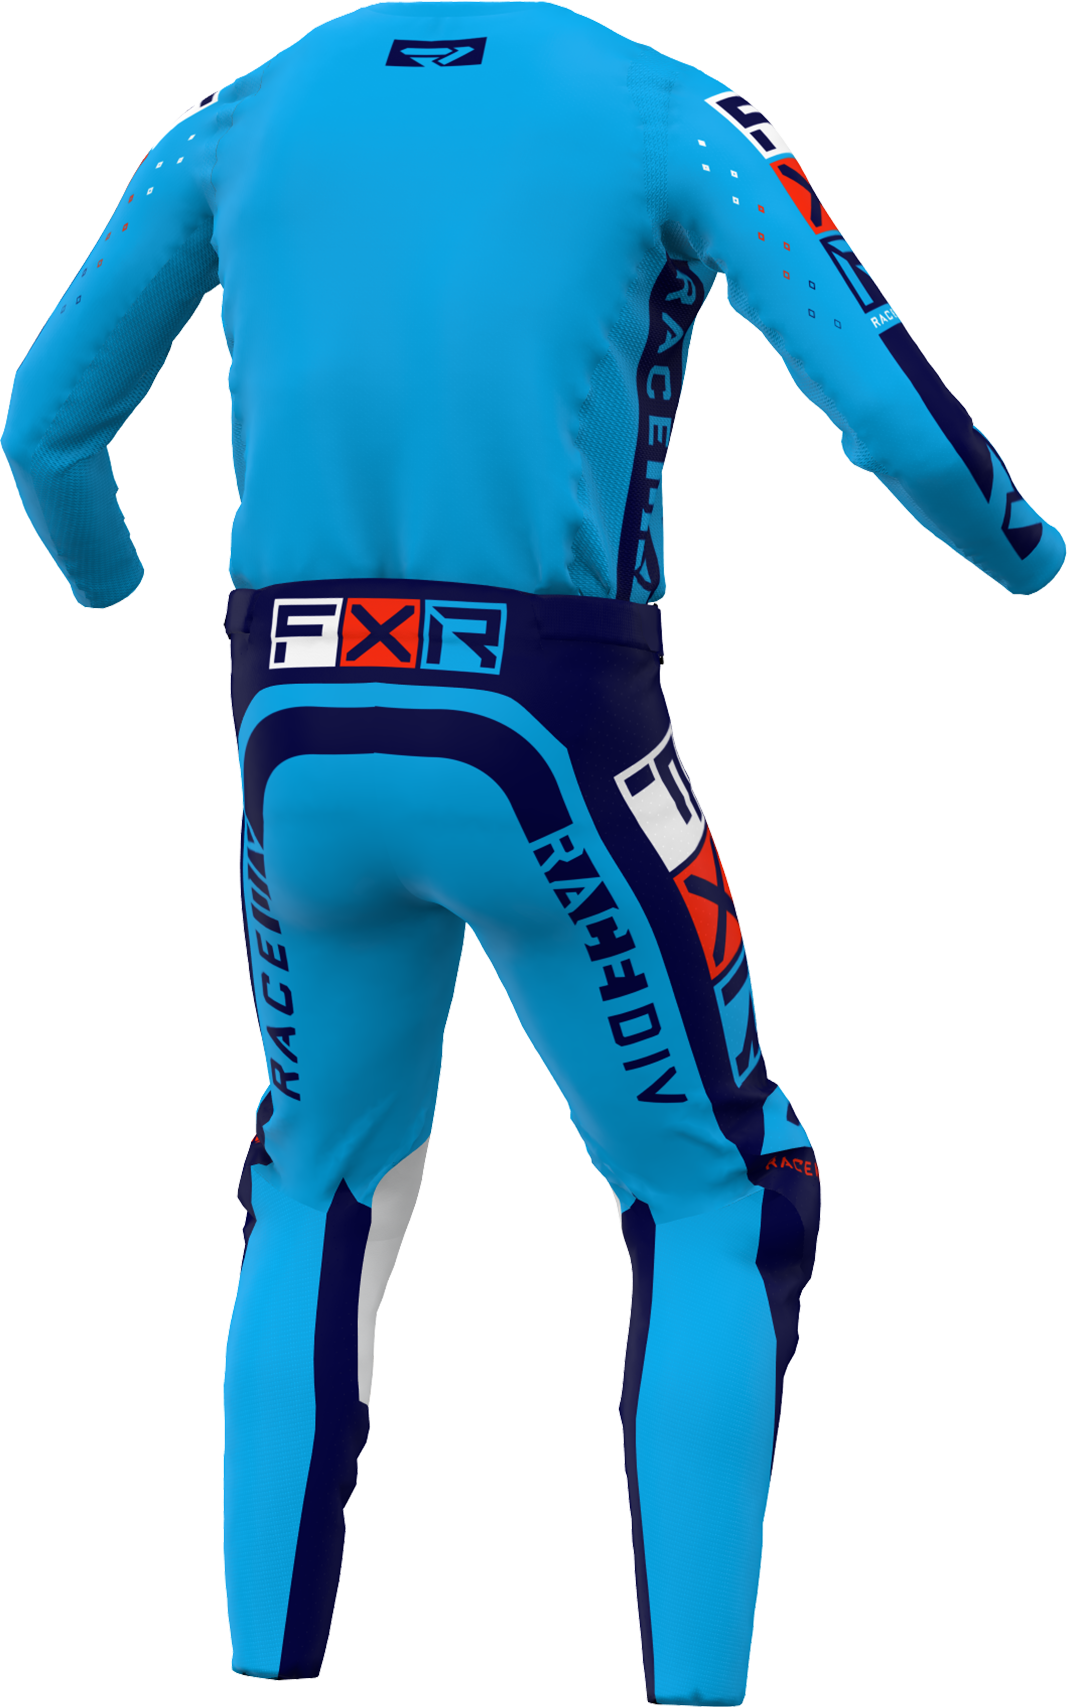 A 3D image of FXR's Podium Pro LE MX Jersey and Pant in Cyan/Red/Navy colorway